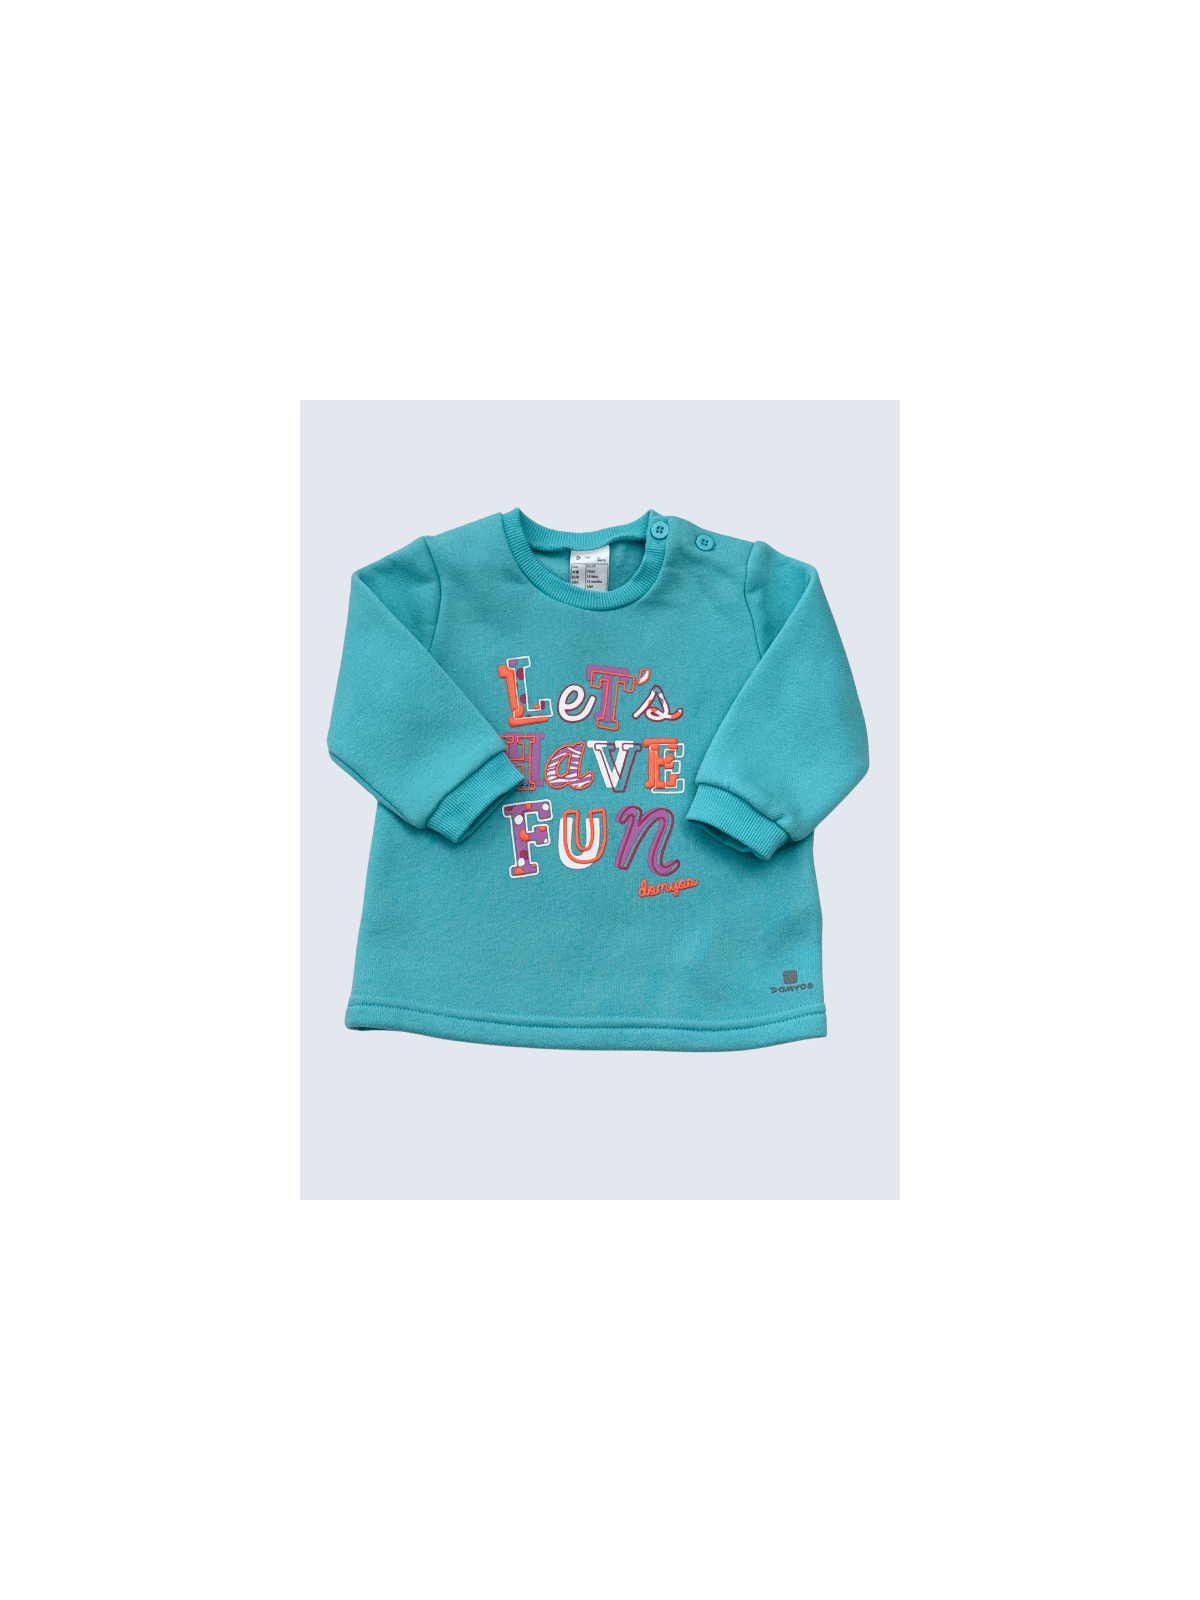 Pull d'occasion Domyos 12 Mois pour fille.